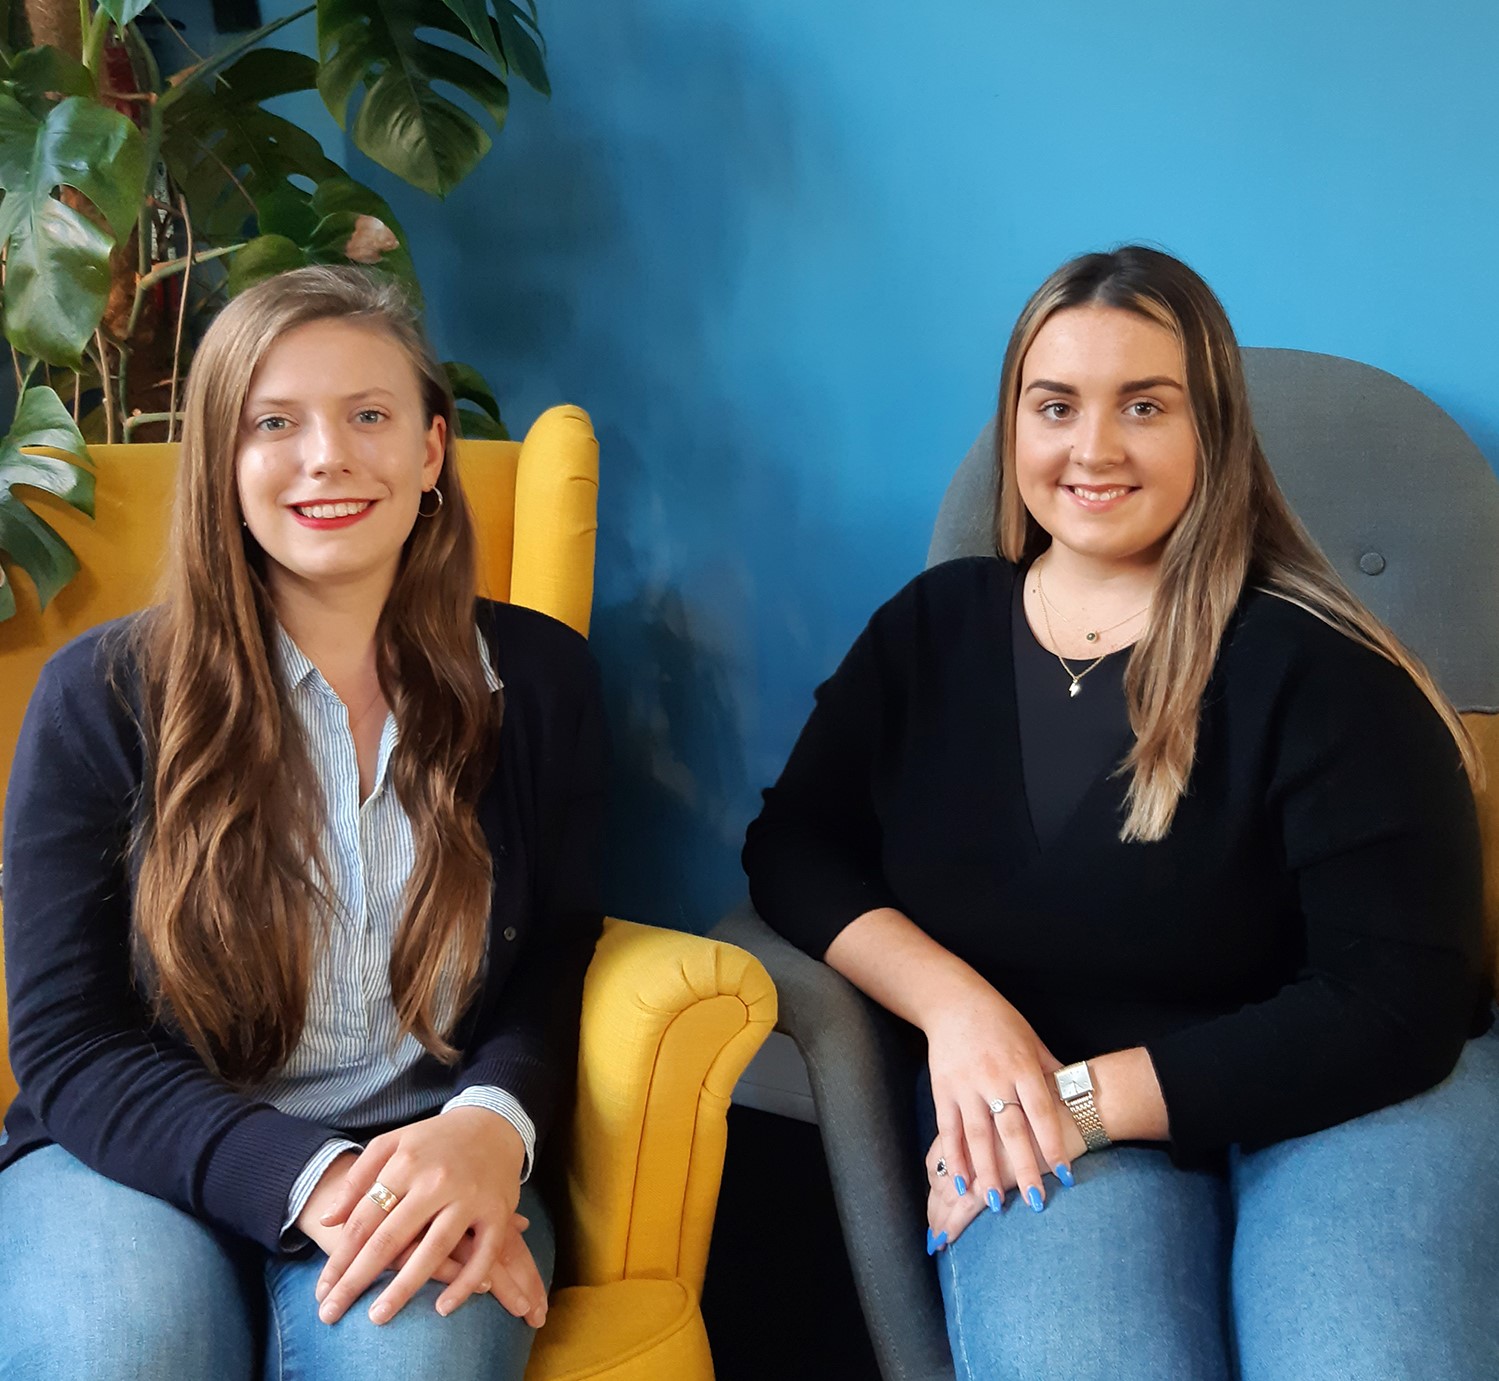 School of Law graduates create new app to help those living with dementia connect with loved ones